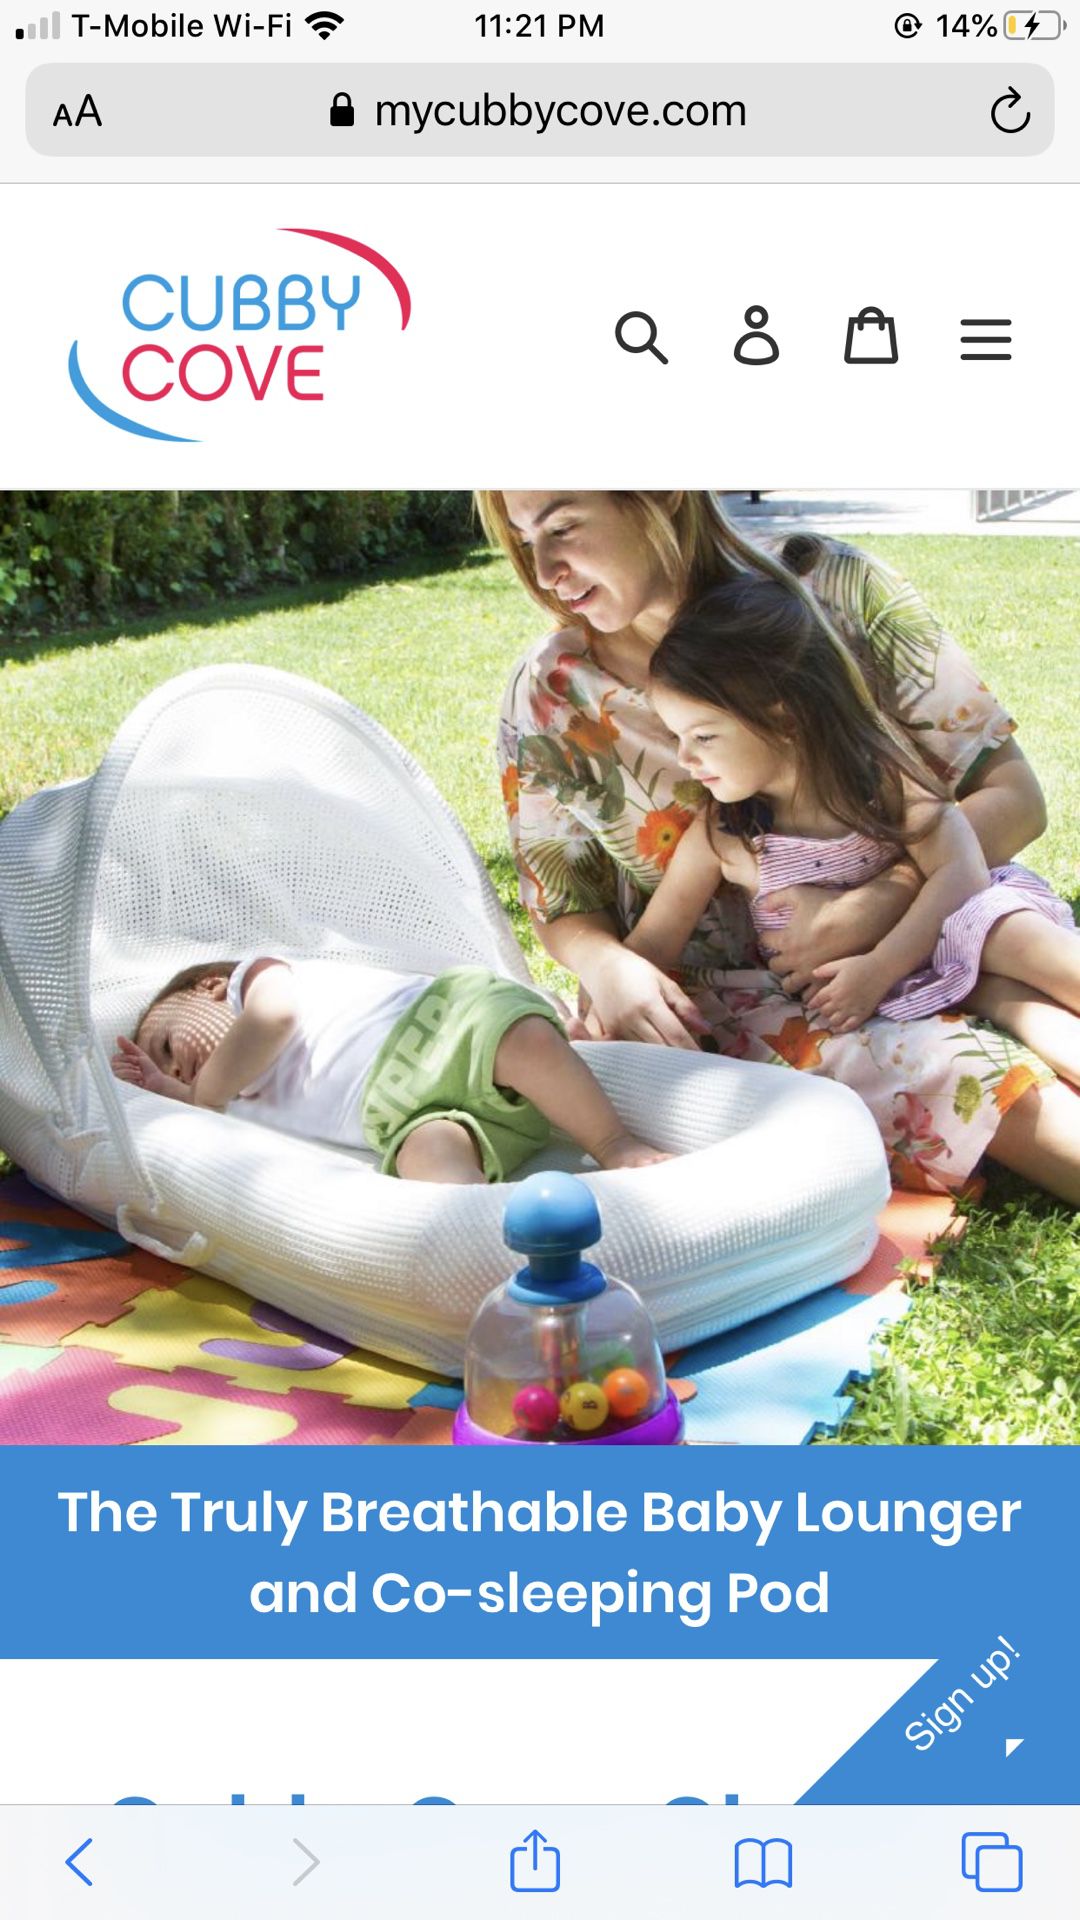 Cubby cove The Truly Breathable Baby Lounger and Co-sleeping Pod , baby nest , baby bed , newborn better then DockATot